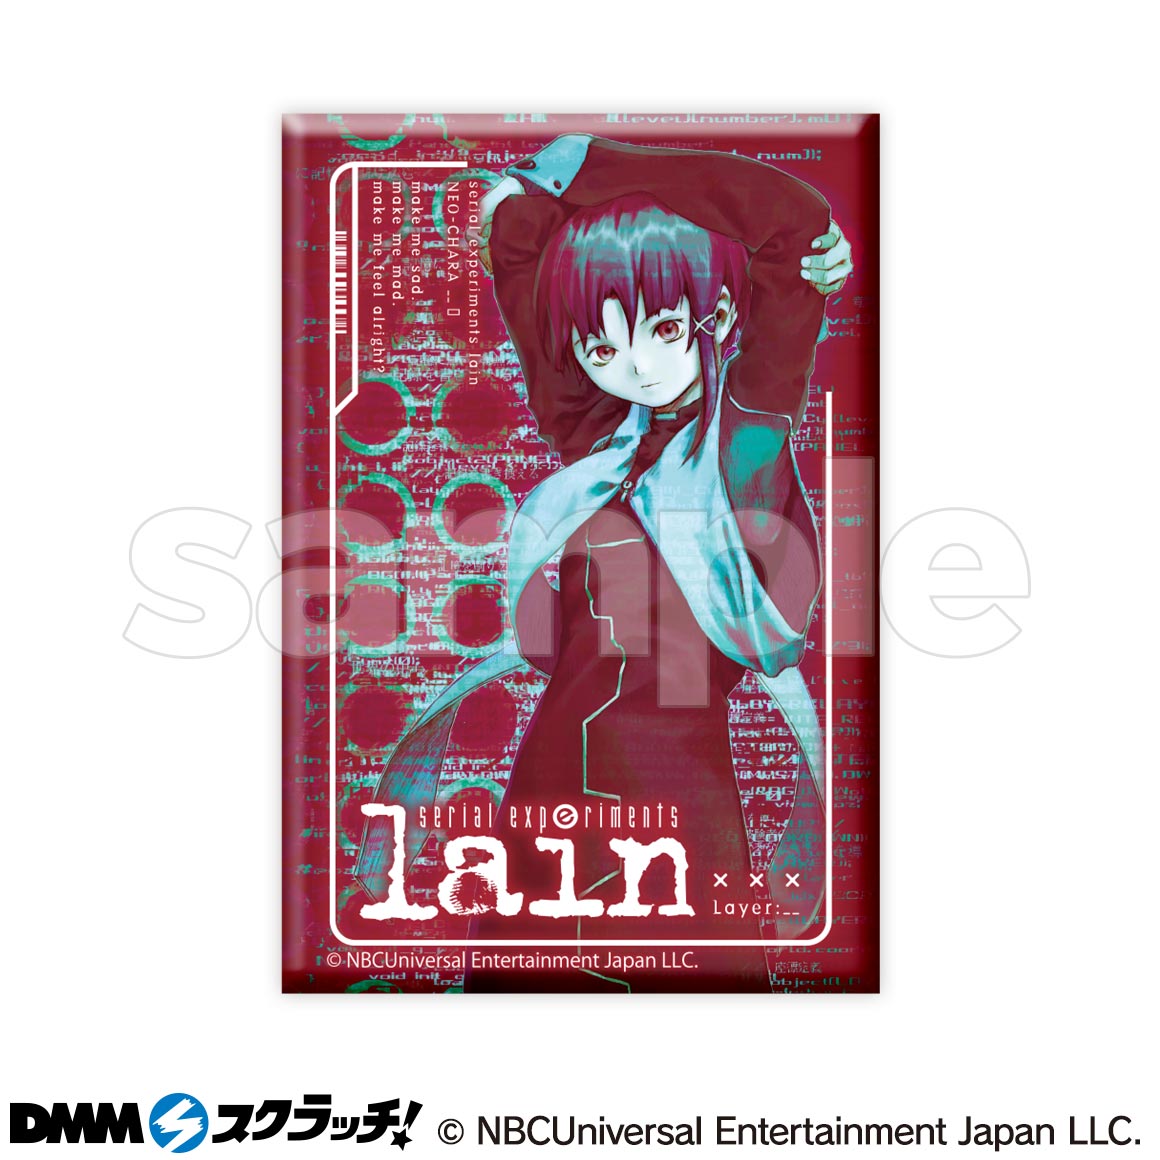 TVアニメ「serial experiments lain」 スクラッチ【NEO-CHARA】 - DMM ...